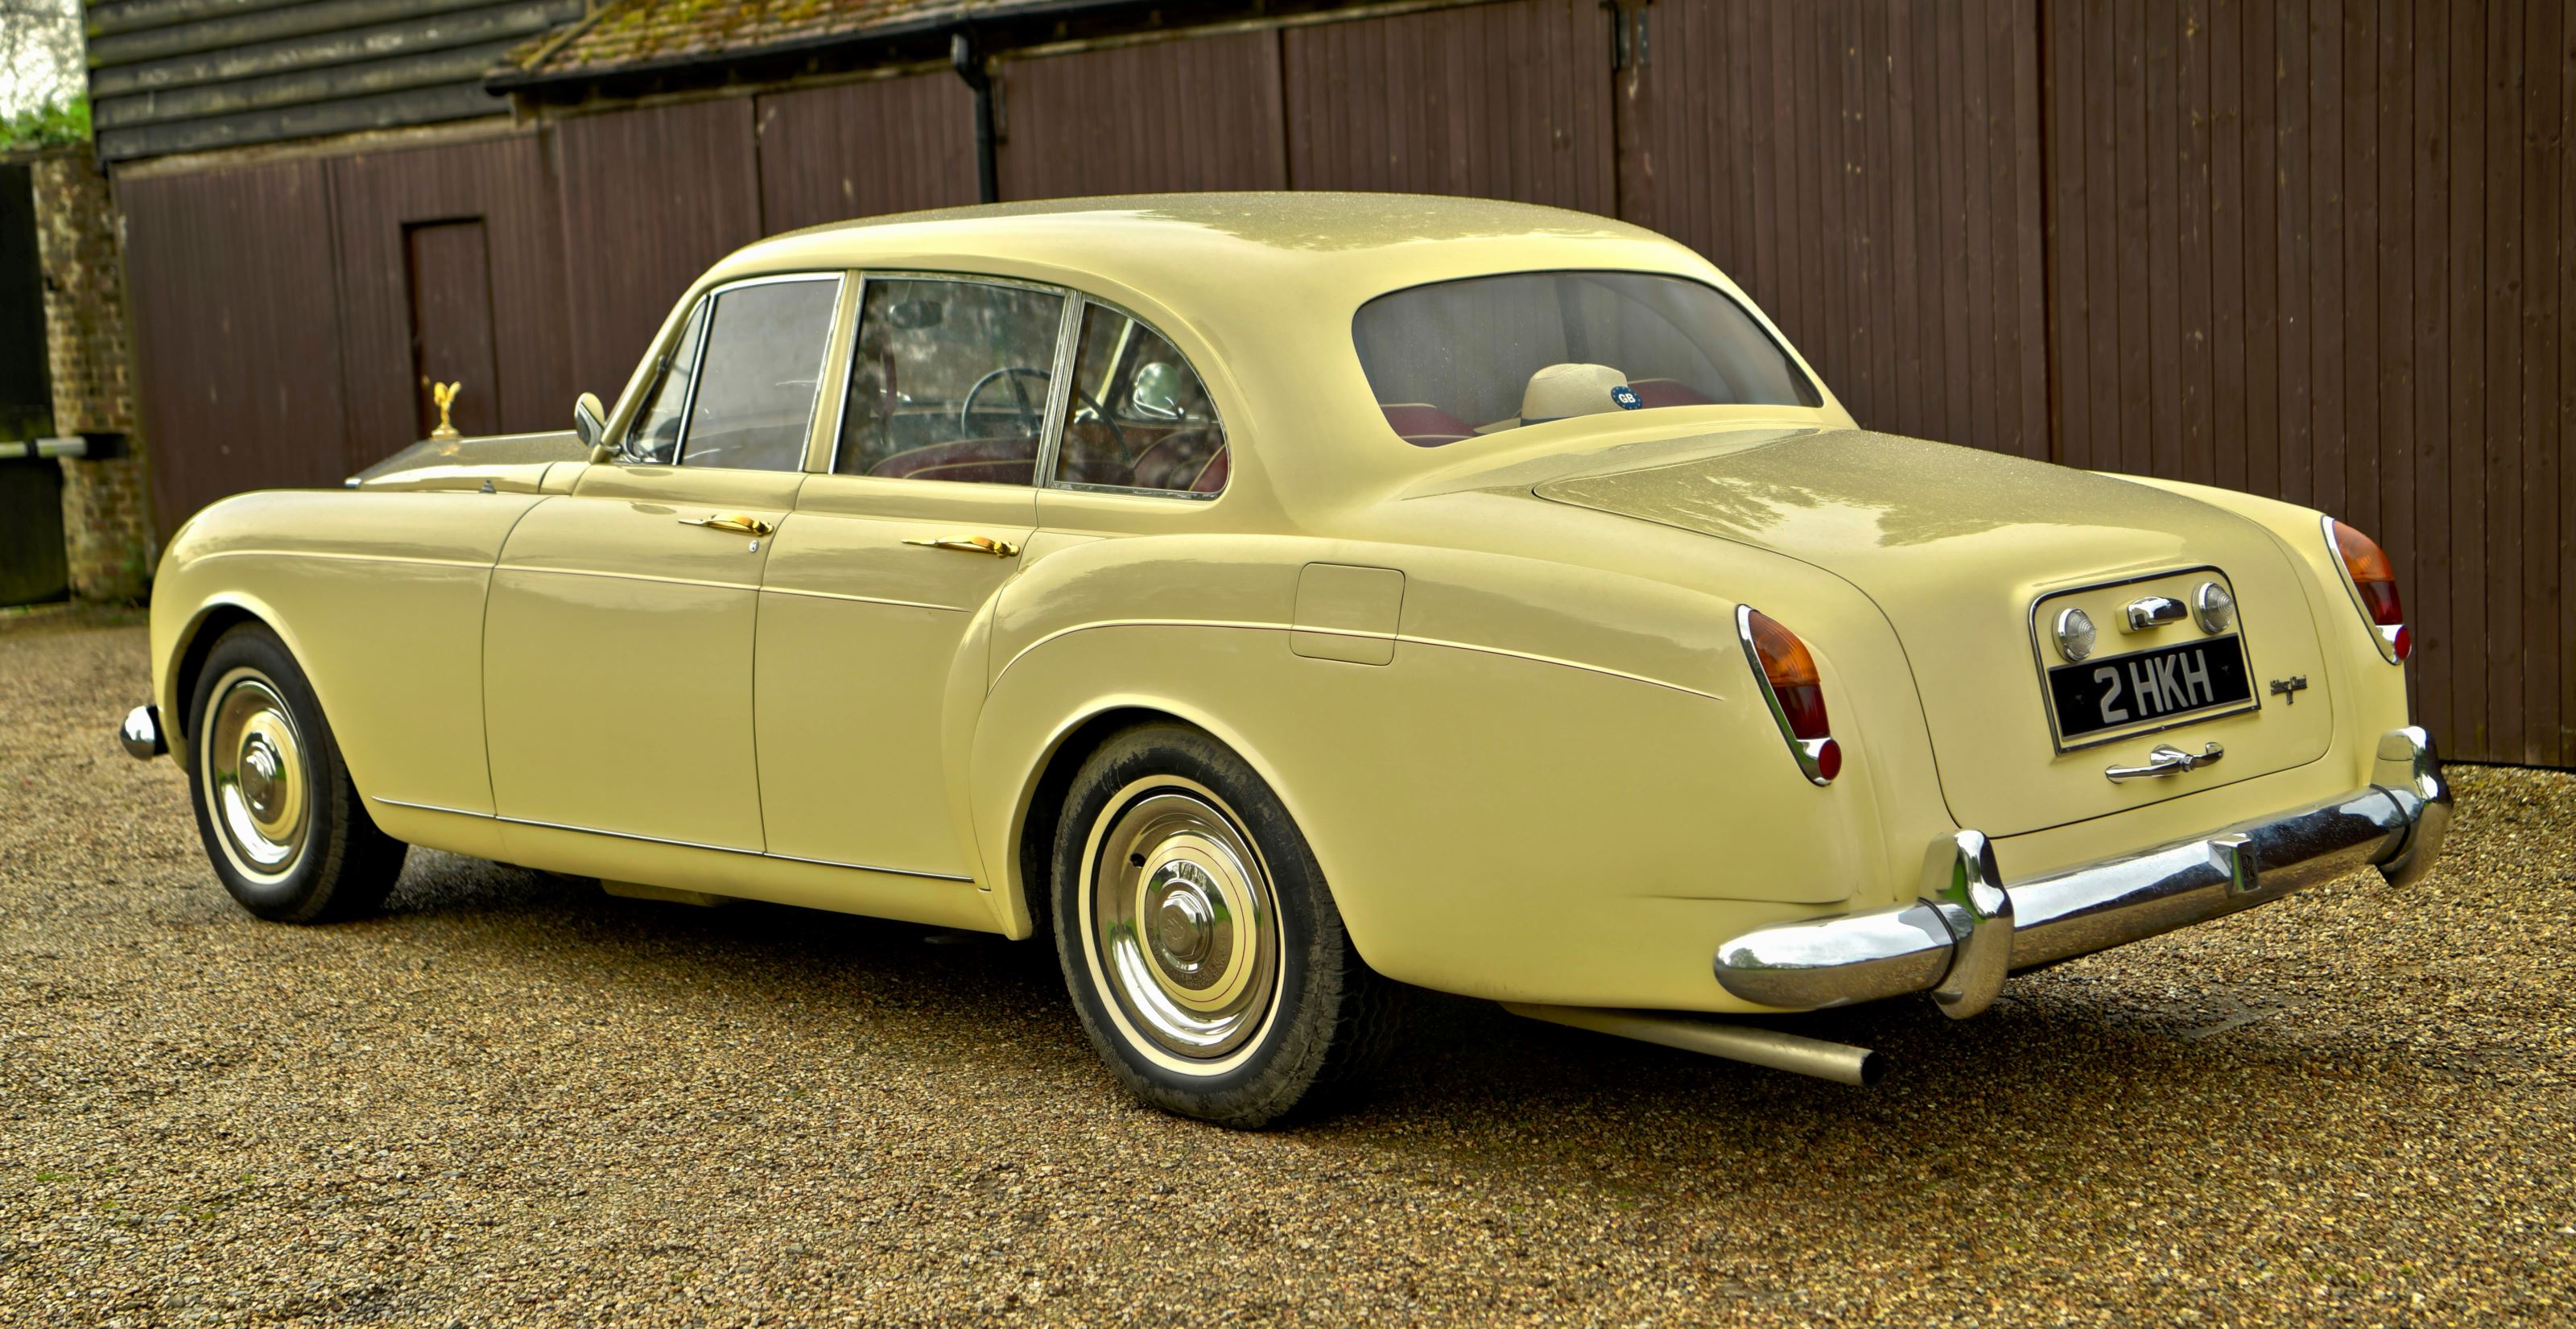 Rolls royce silver cloud 3 flying spur by h.j. mulliner xhvft8iyse1ue2e6tfcuc